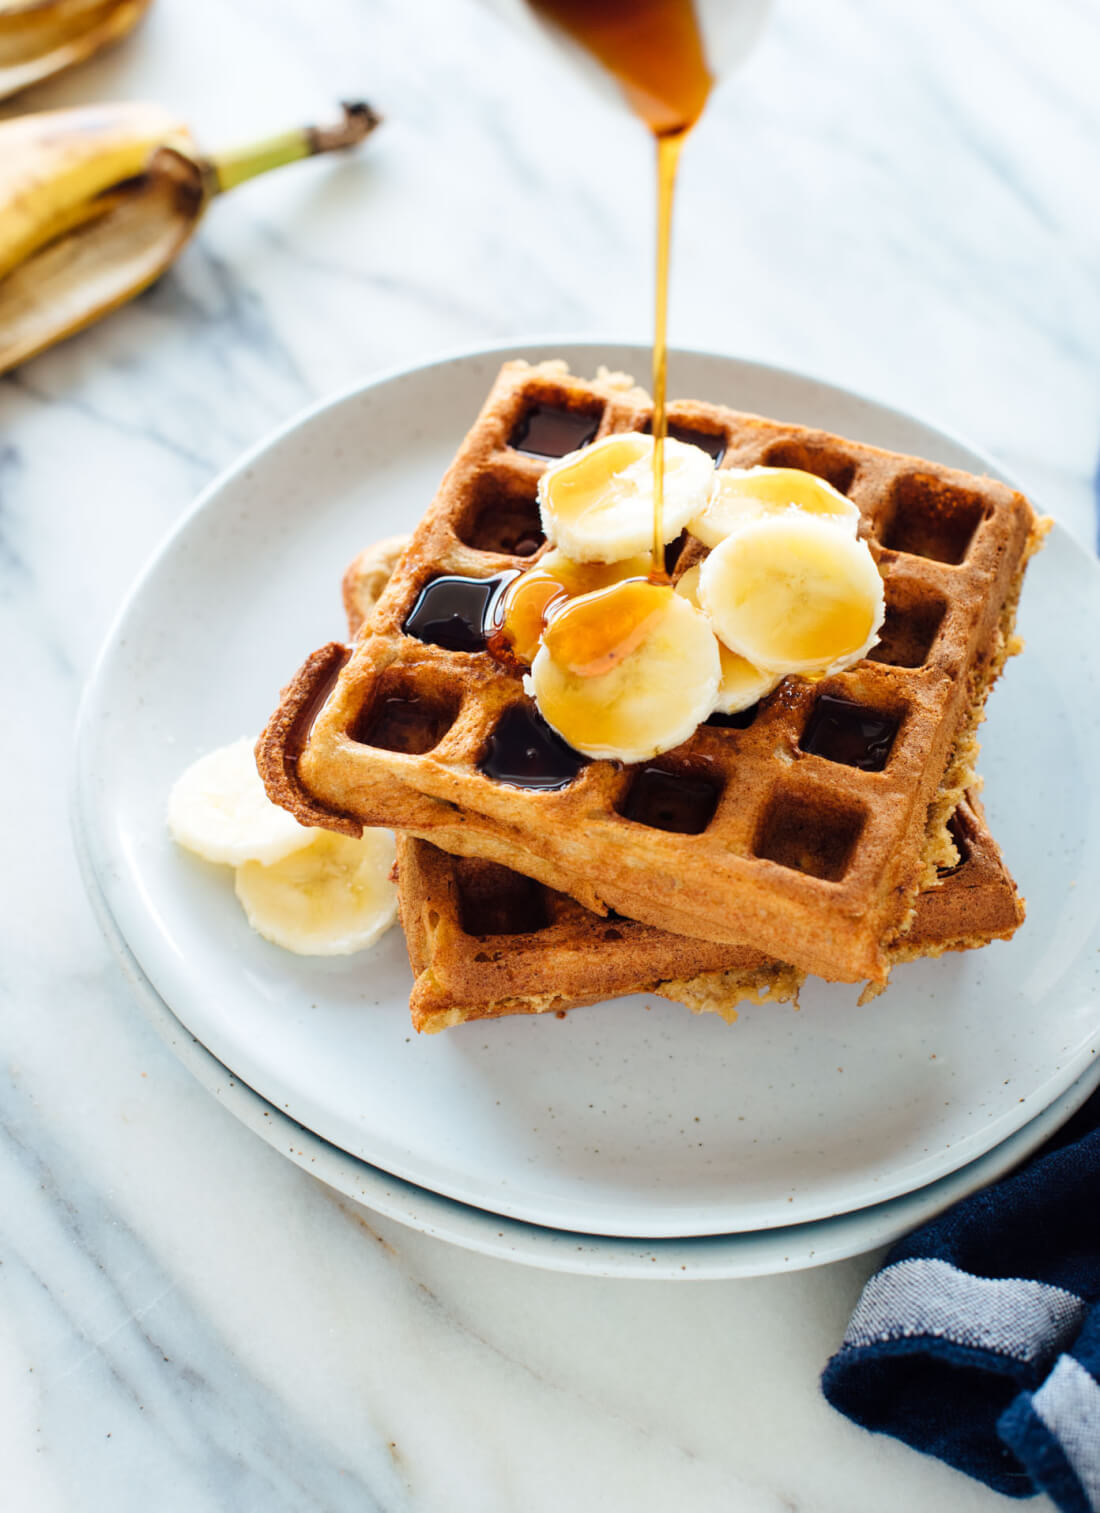 Incredible gluten-free banana oat waffles! These gluten-free waffles require only one kind of flour—oat flour—which is easy to make yourself with old-fashioned oats! cookieandkate.com